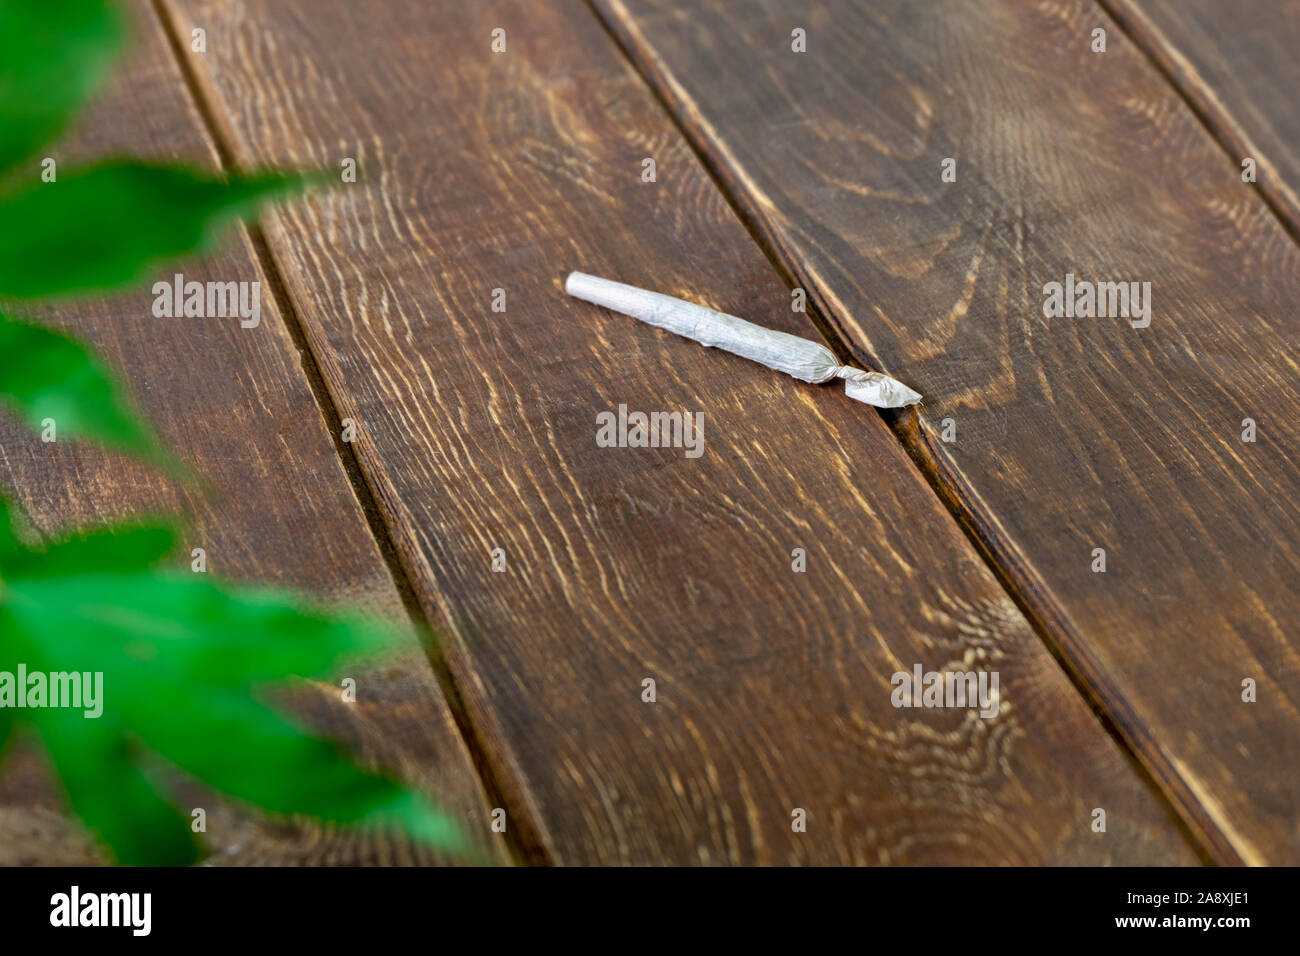 Rolled canabis (marijuana) joint on wooden table Stock Photo